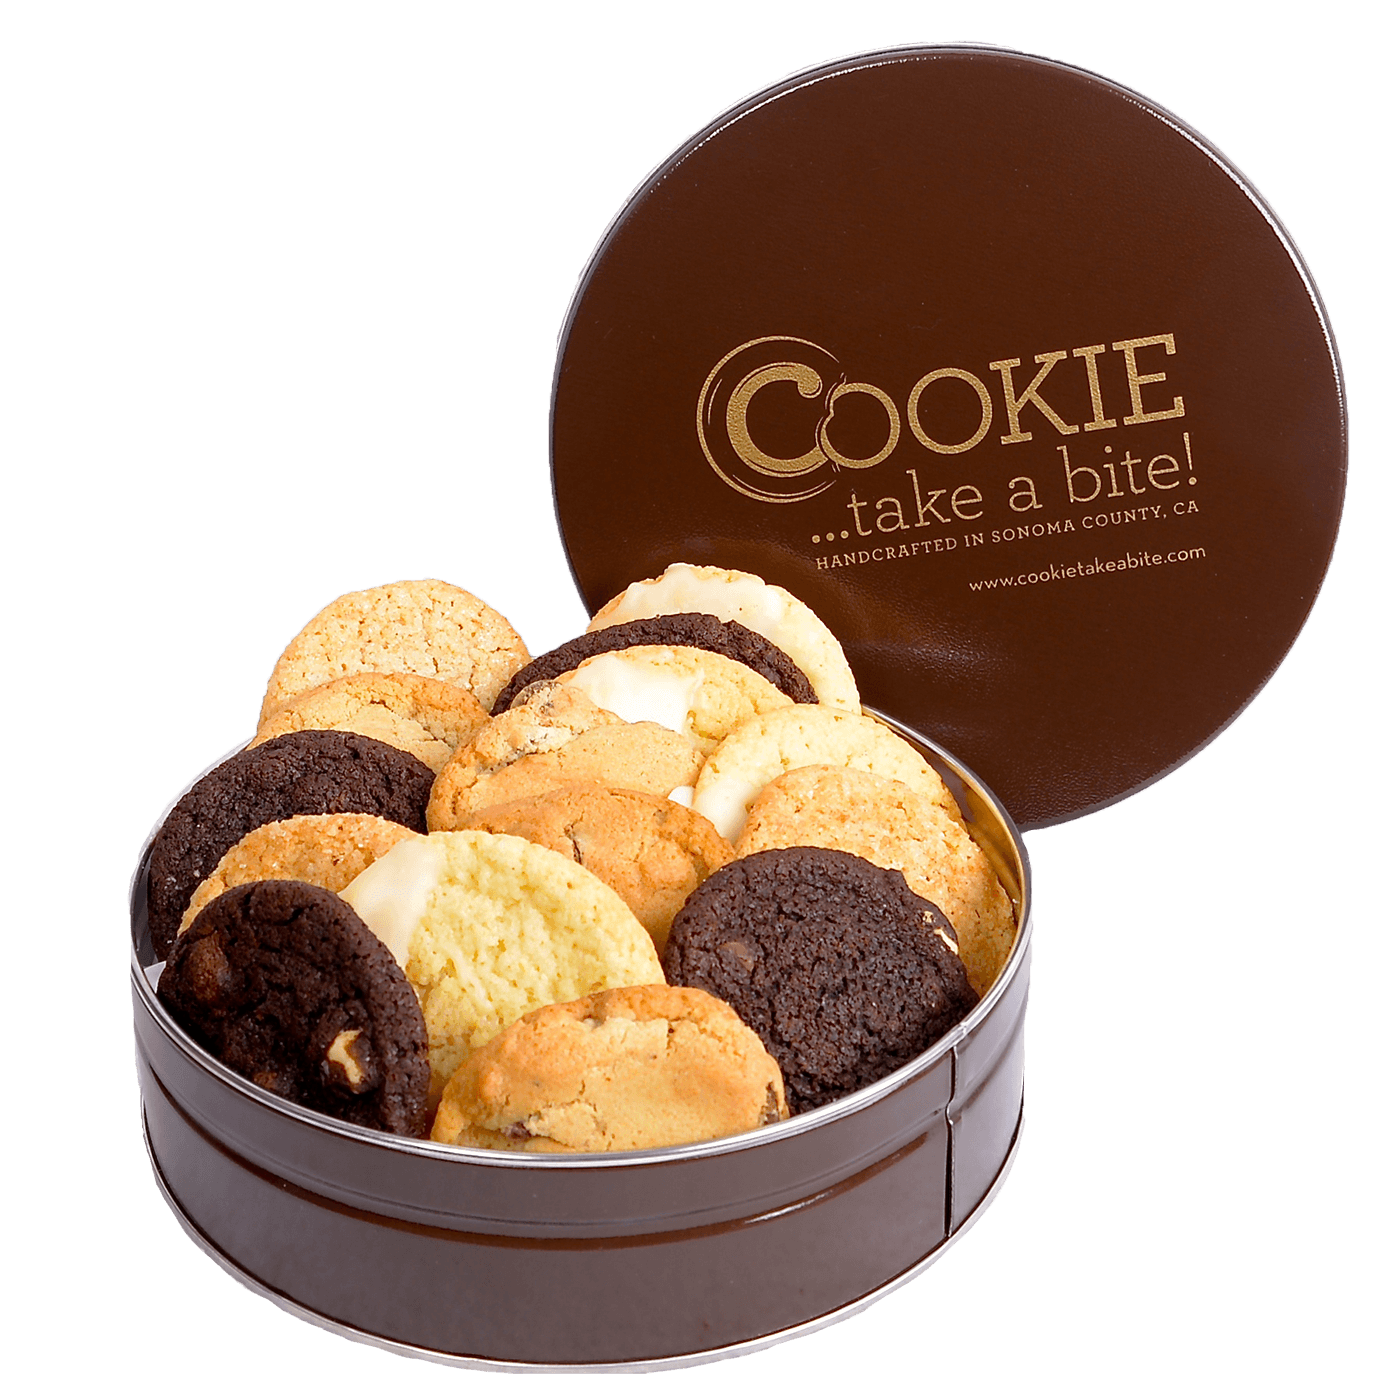 Cookie Containers